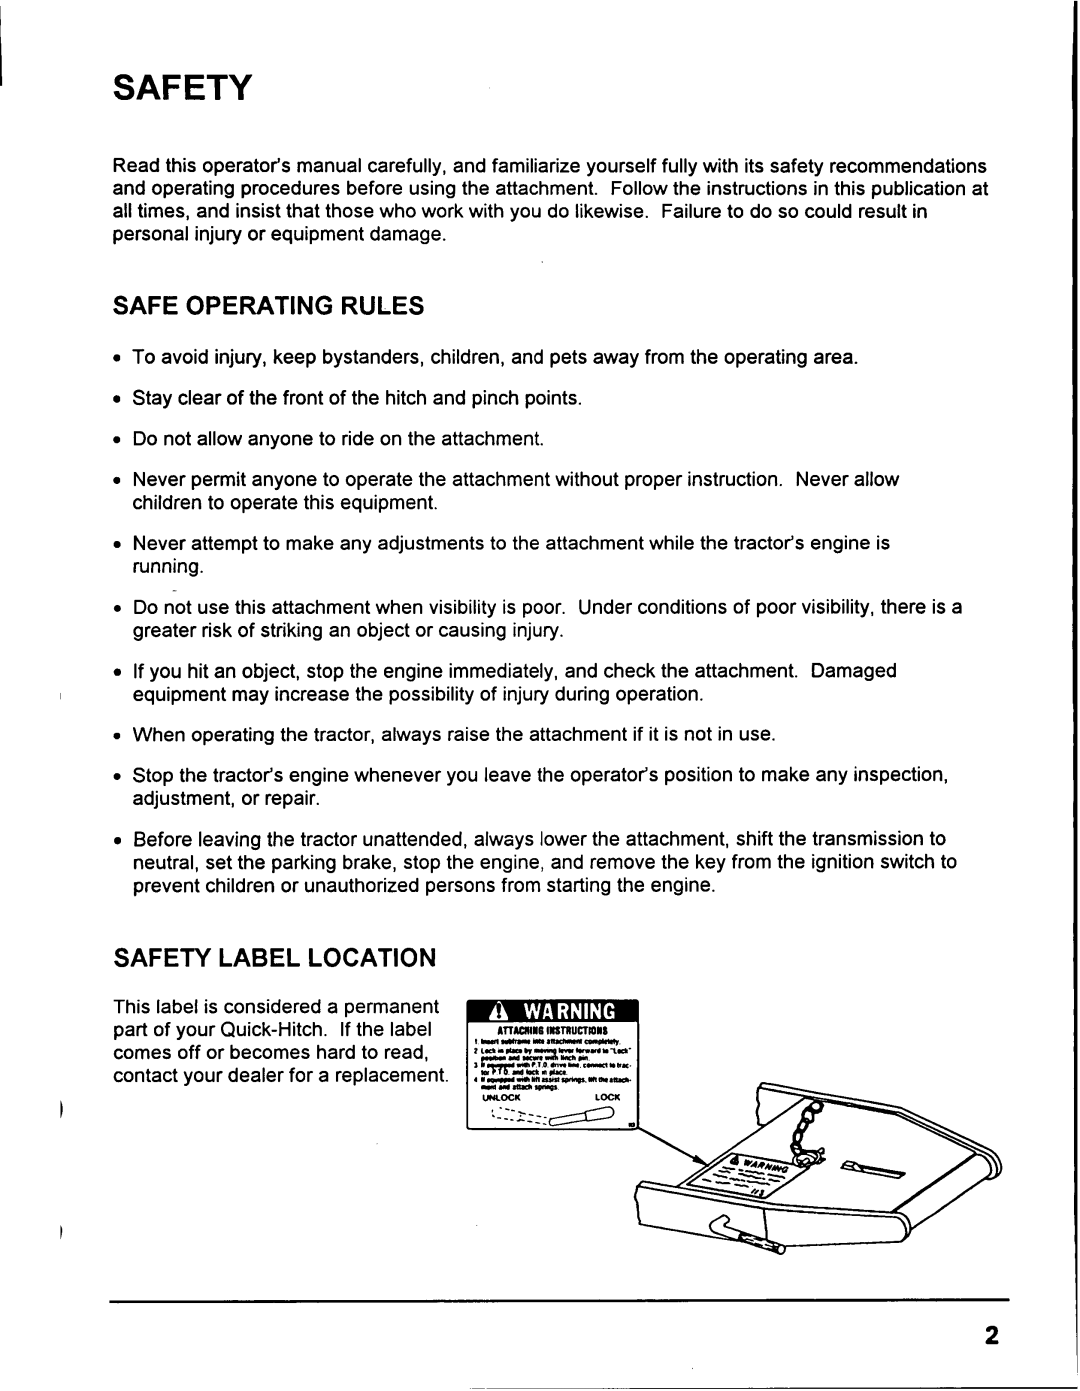 Honda Power Equipment QH5000 manual Safe Operating Rules, Safety Label Location 